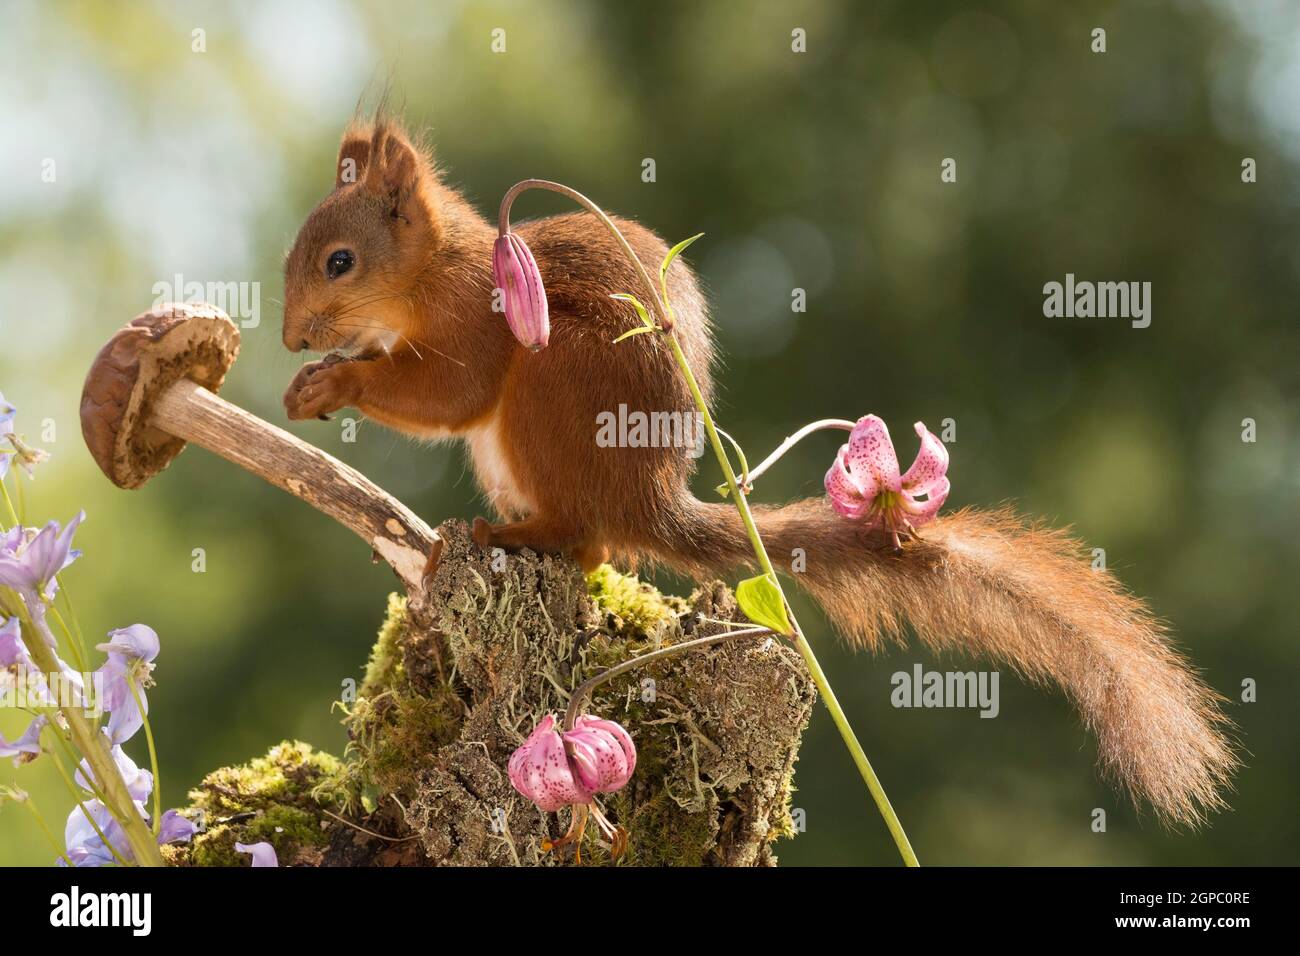 red squirrel  standing with a mushroom Stock Photo